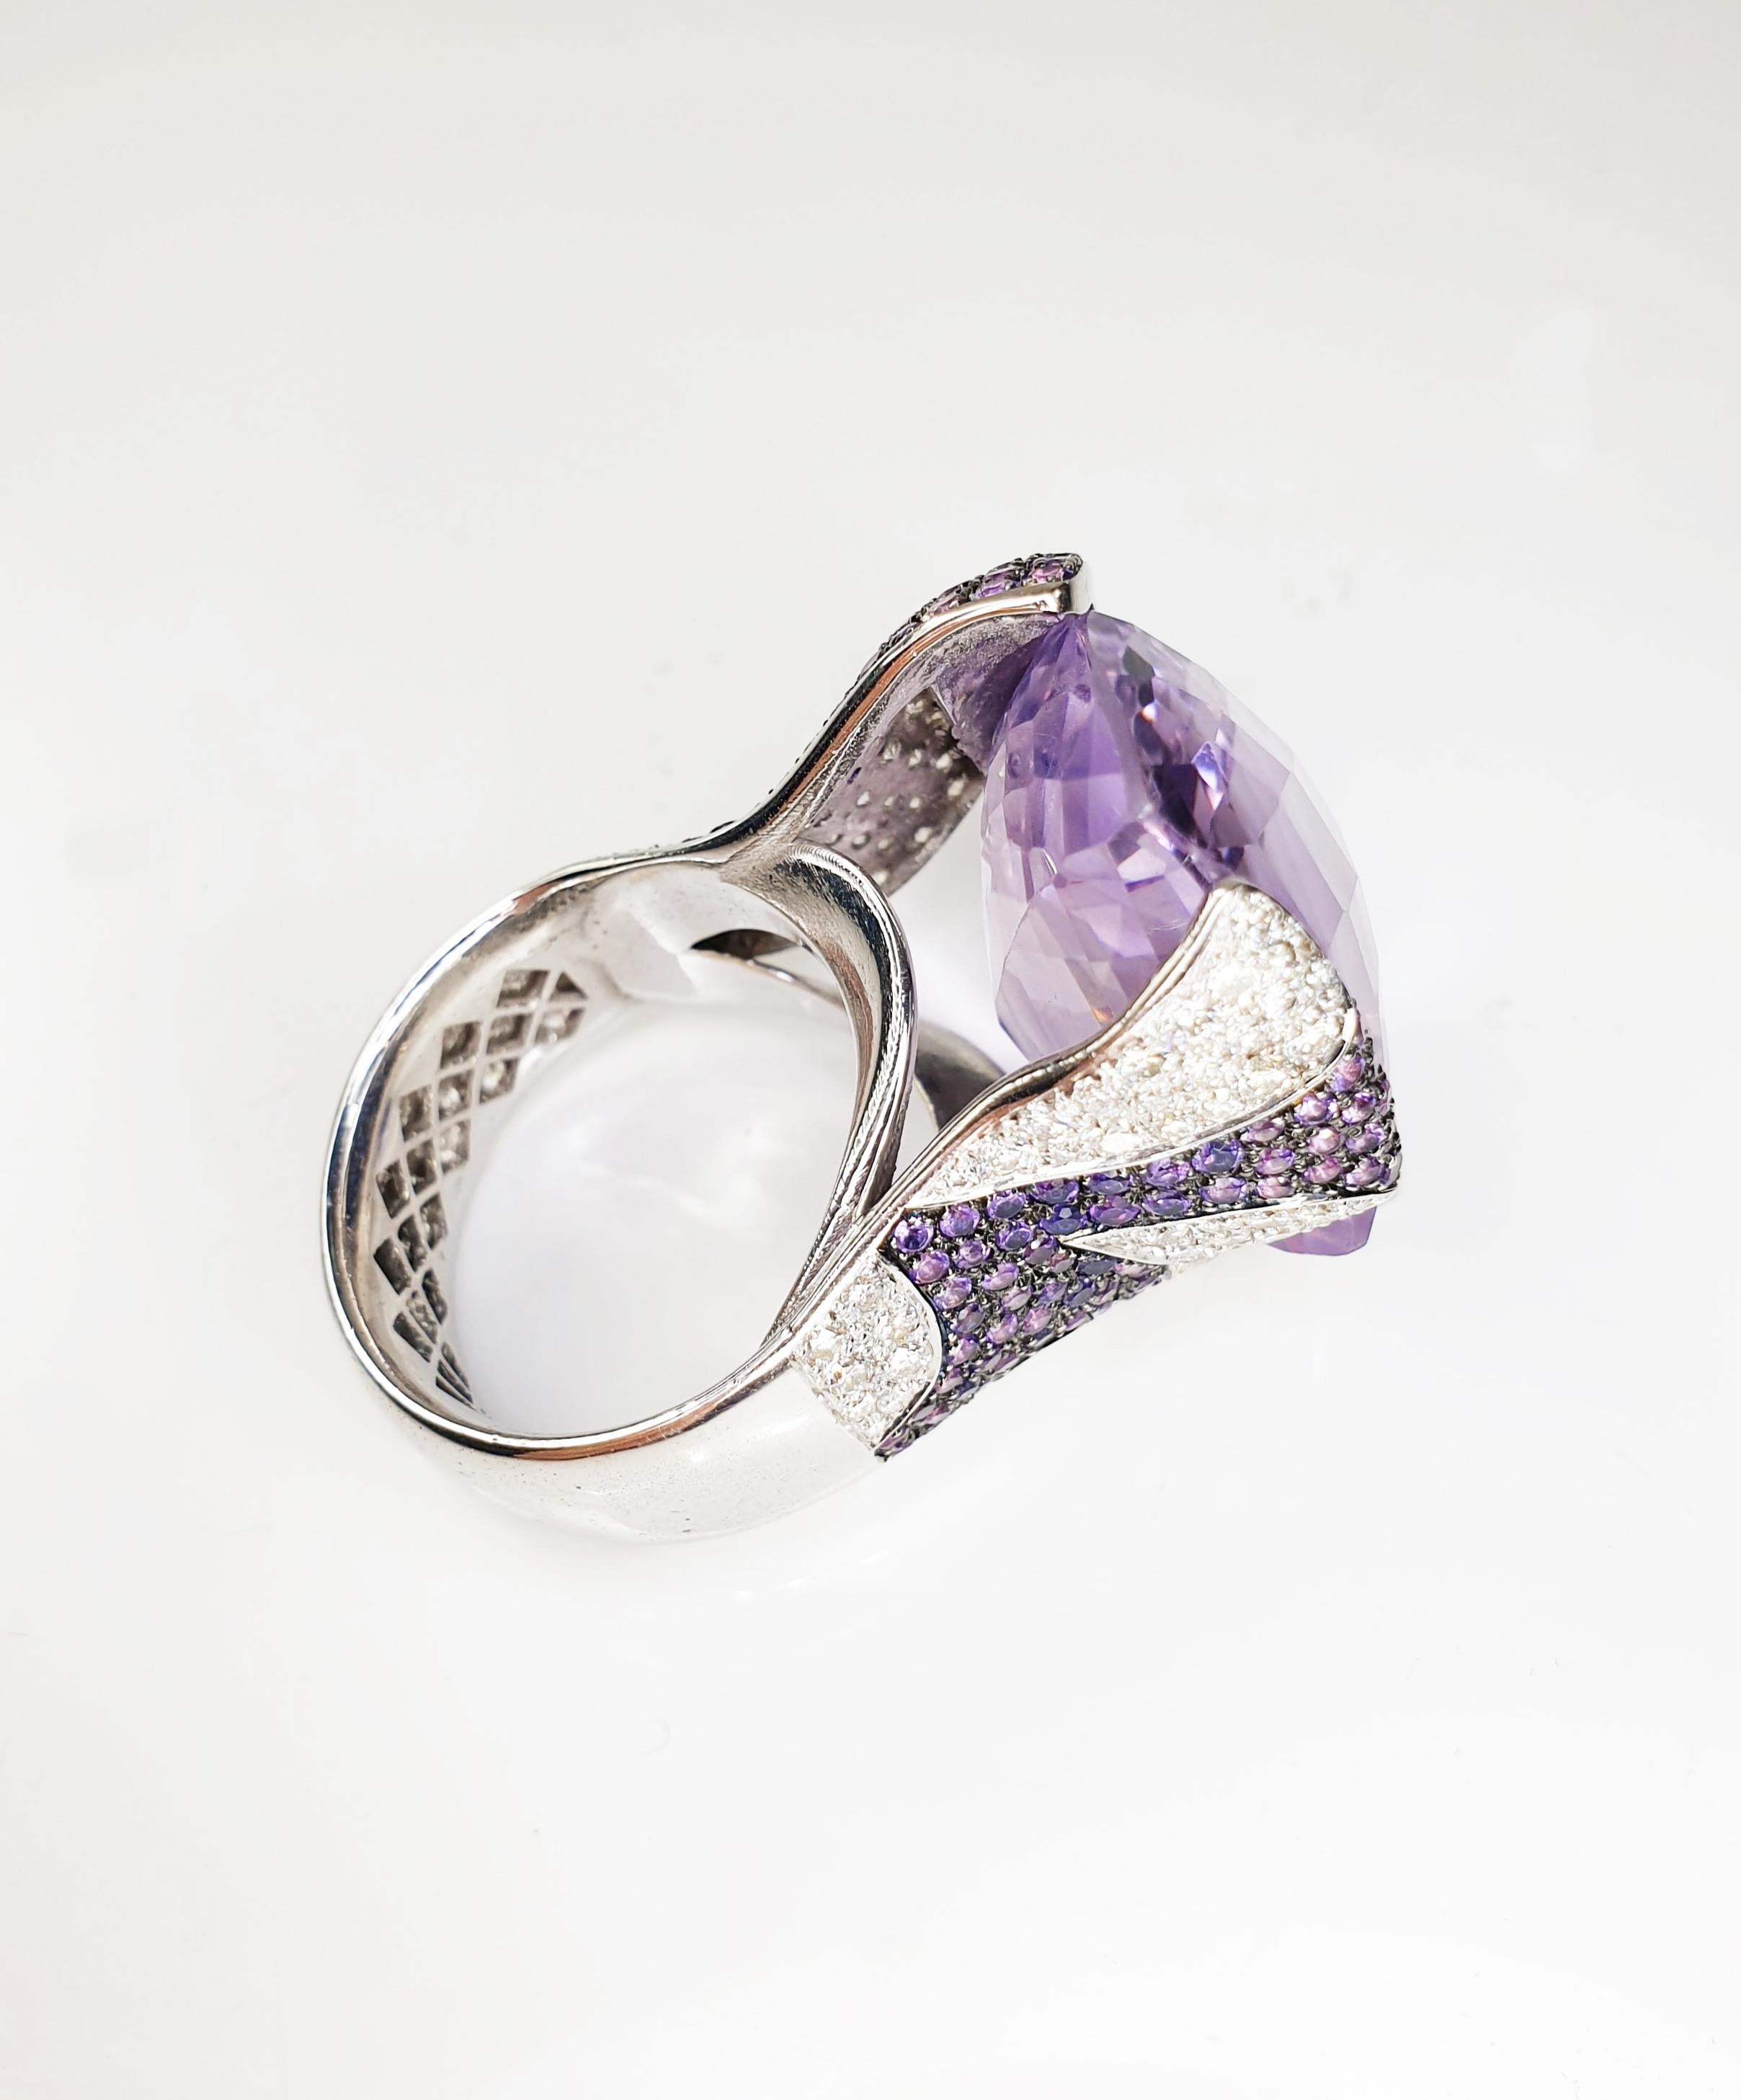 Contemporary Multifaceted 32 Carat Amethyst with Diamonds and 18 Karat White Gold Ring For Sale